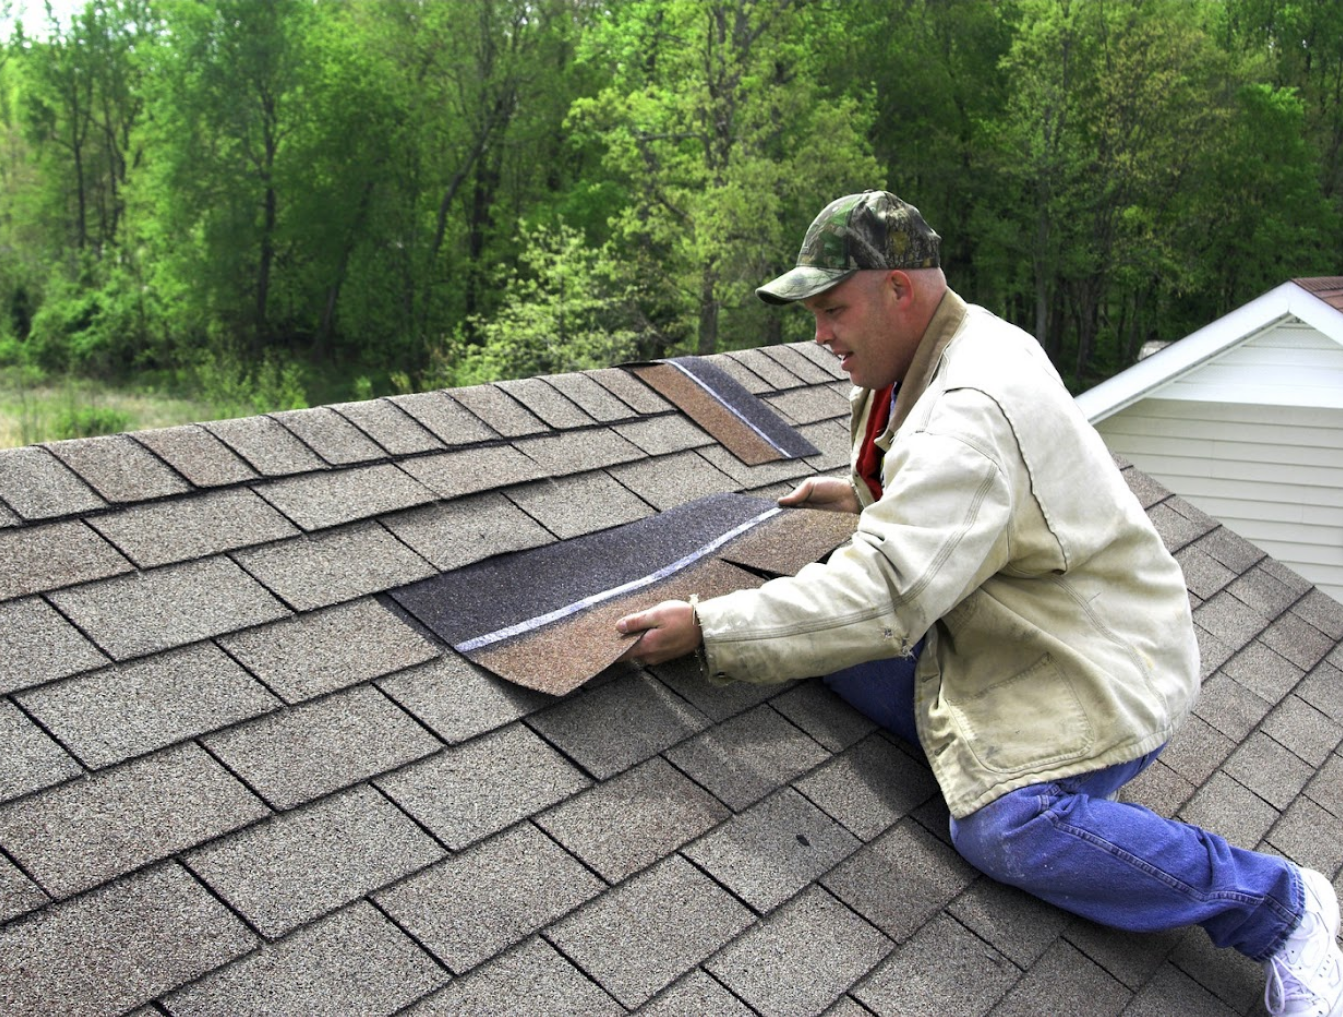 Applying Shingle Roofing | Amex Roofing and Drainage Ltd.